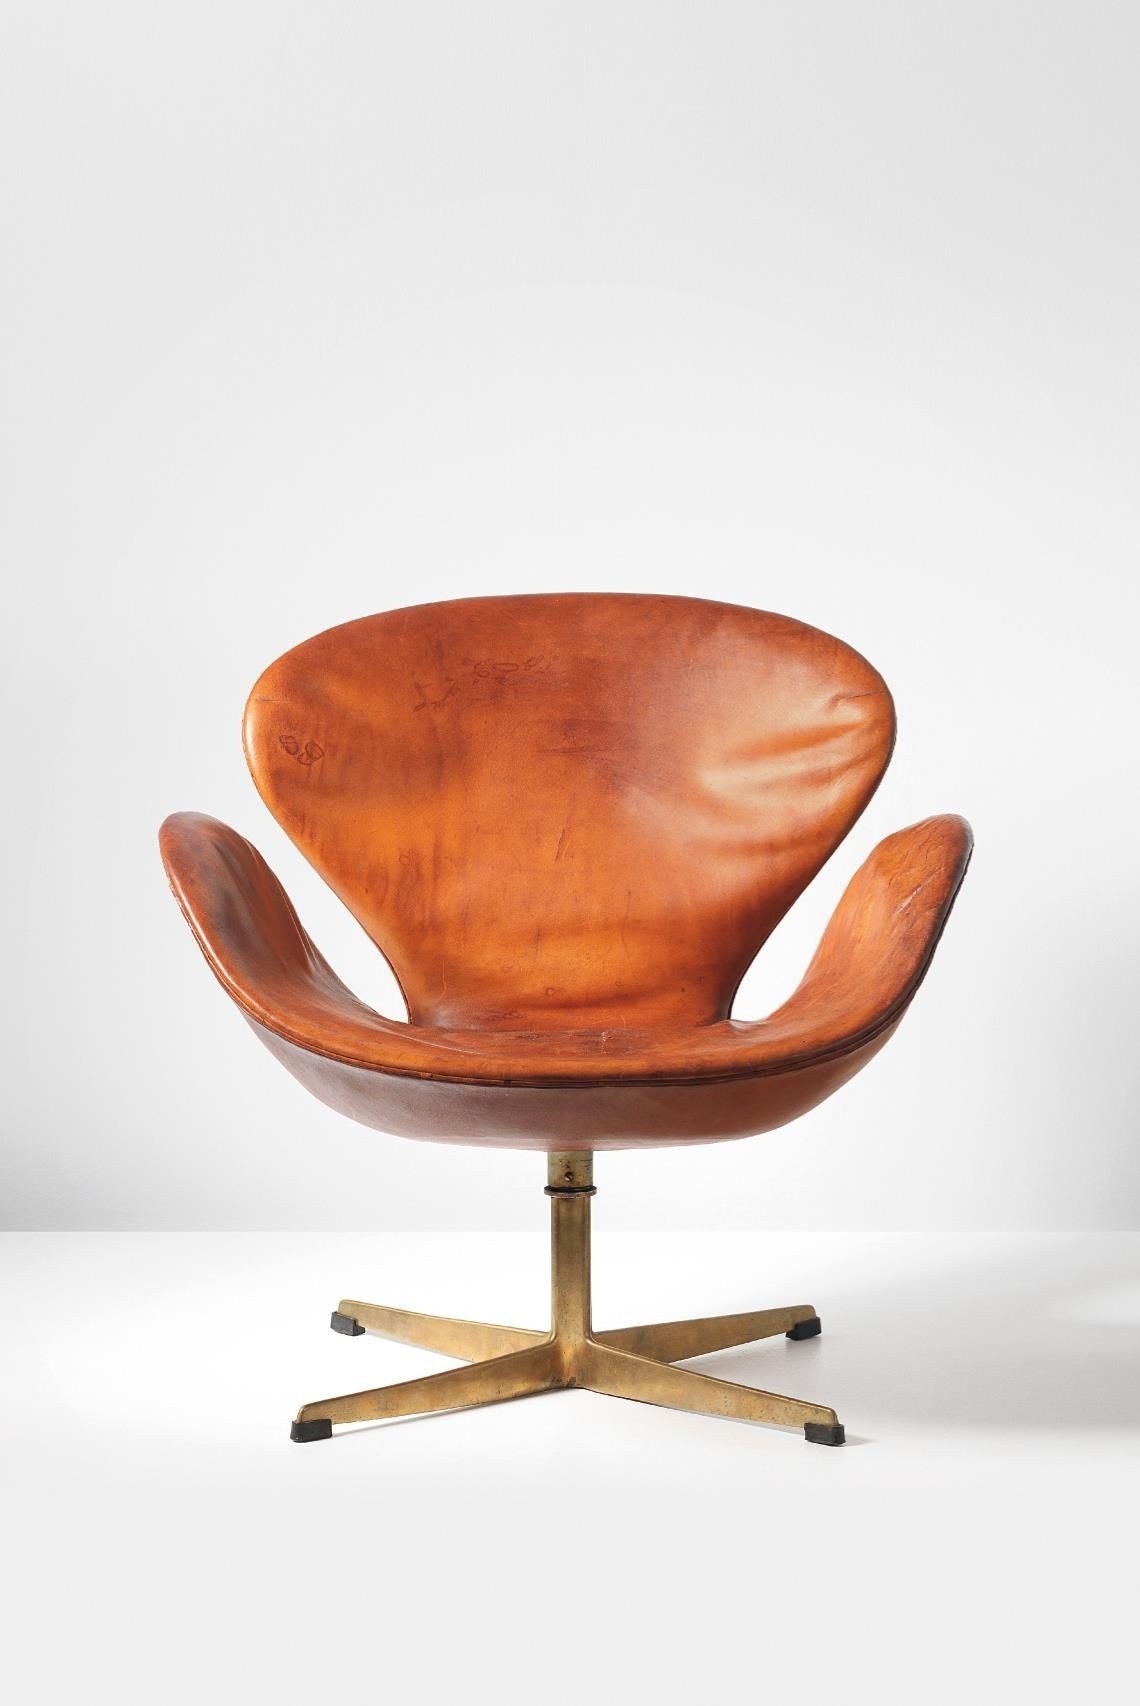 Leather swivel chairs